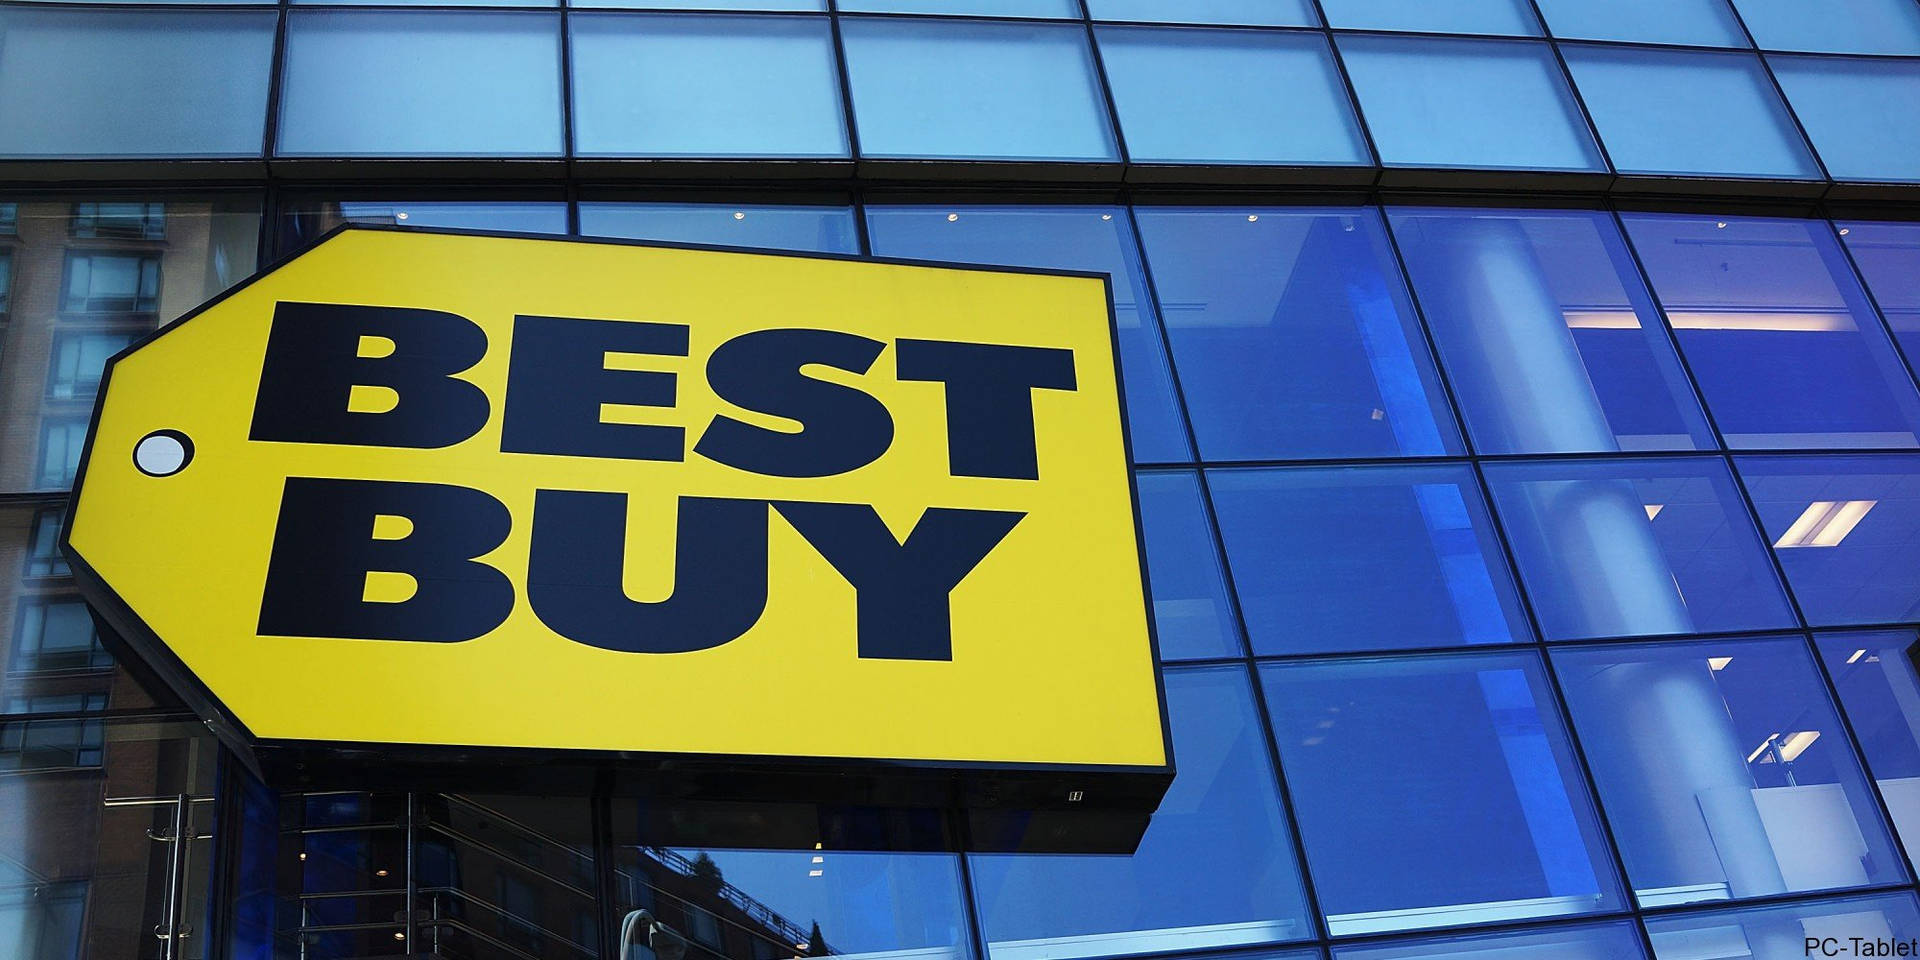 Download Best Buy Signage On Glass Wallpaper